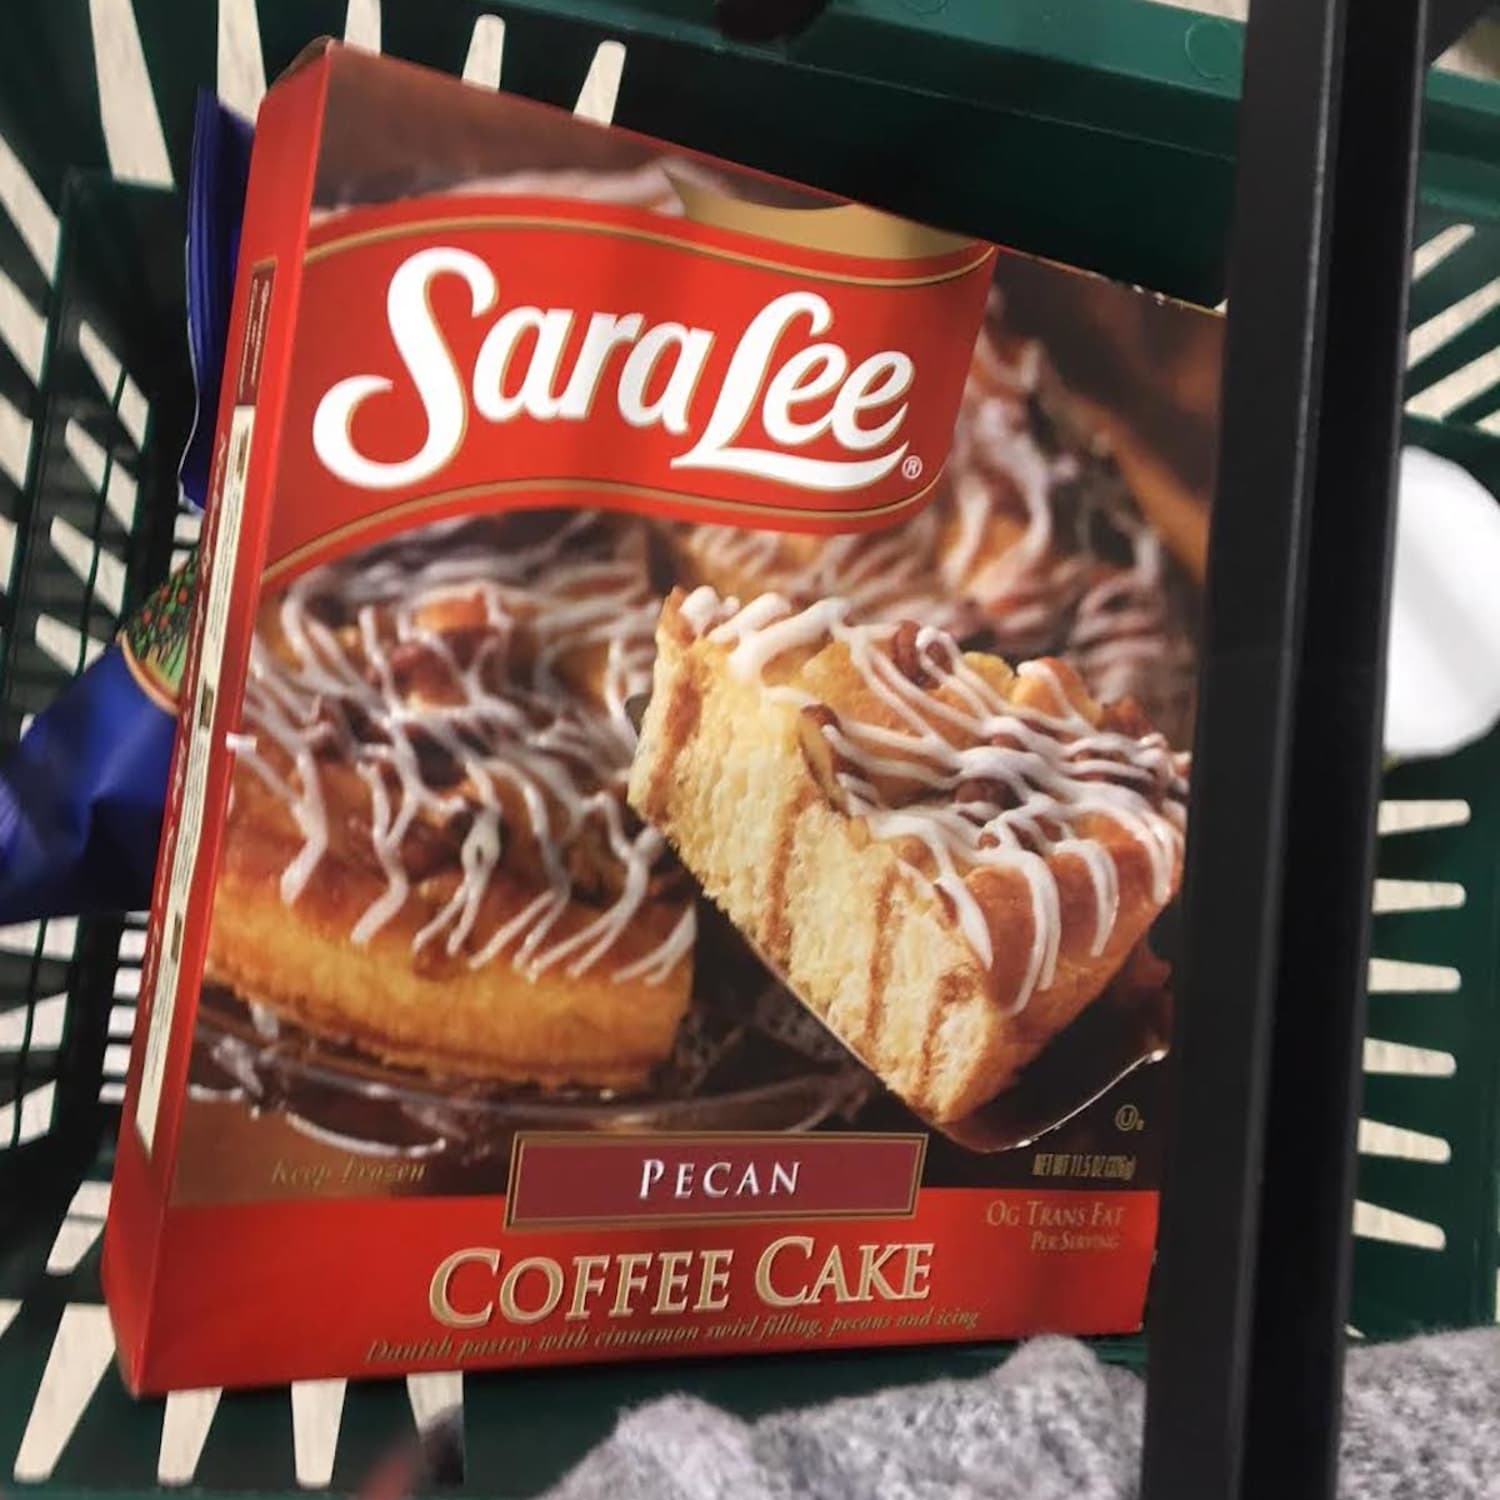 It Isn't Christmas Without Sara Lee's Coffee Cake | Kitchn